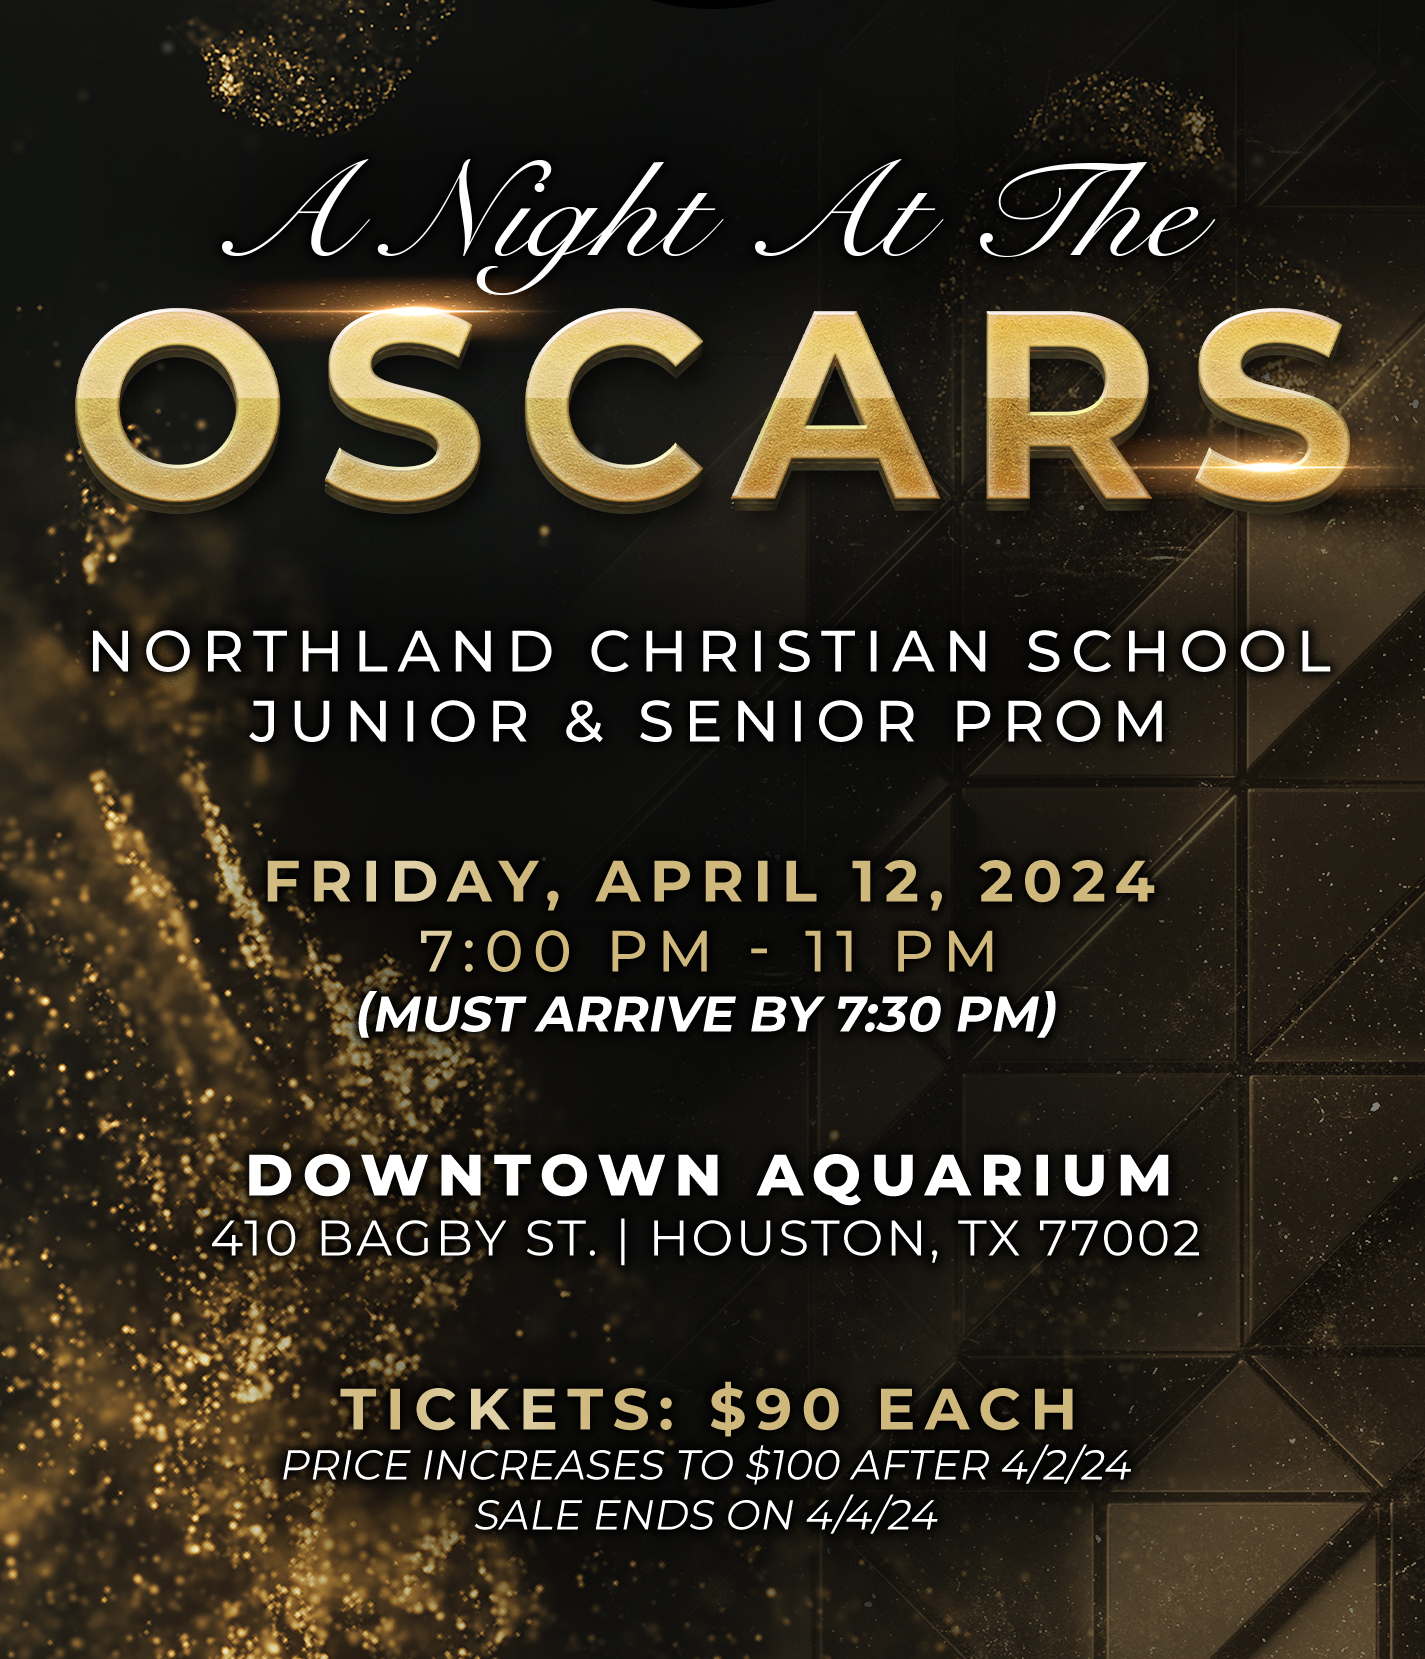 Join us for a Night at the Oscars! We are thrilled to invite you to Northland Christian School's Junior & Senior Prom! Friday, April 12, 2024 7:00 PM - 11:00 PM (Must arrive by 7:30 PM) Downtown Aquarium 410 Baby St. | Houston, TX 77002 TICKETS: $90 Each Price increases to $100 after 4/2/24. Sale ends on 4/4/24